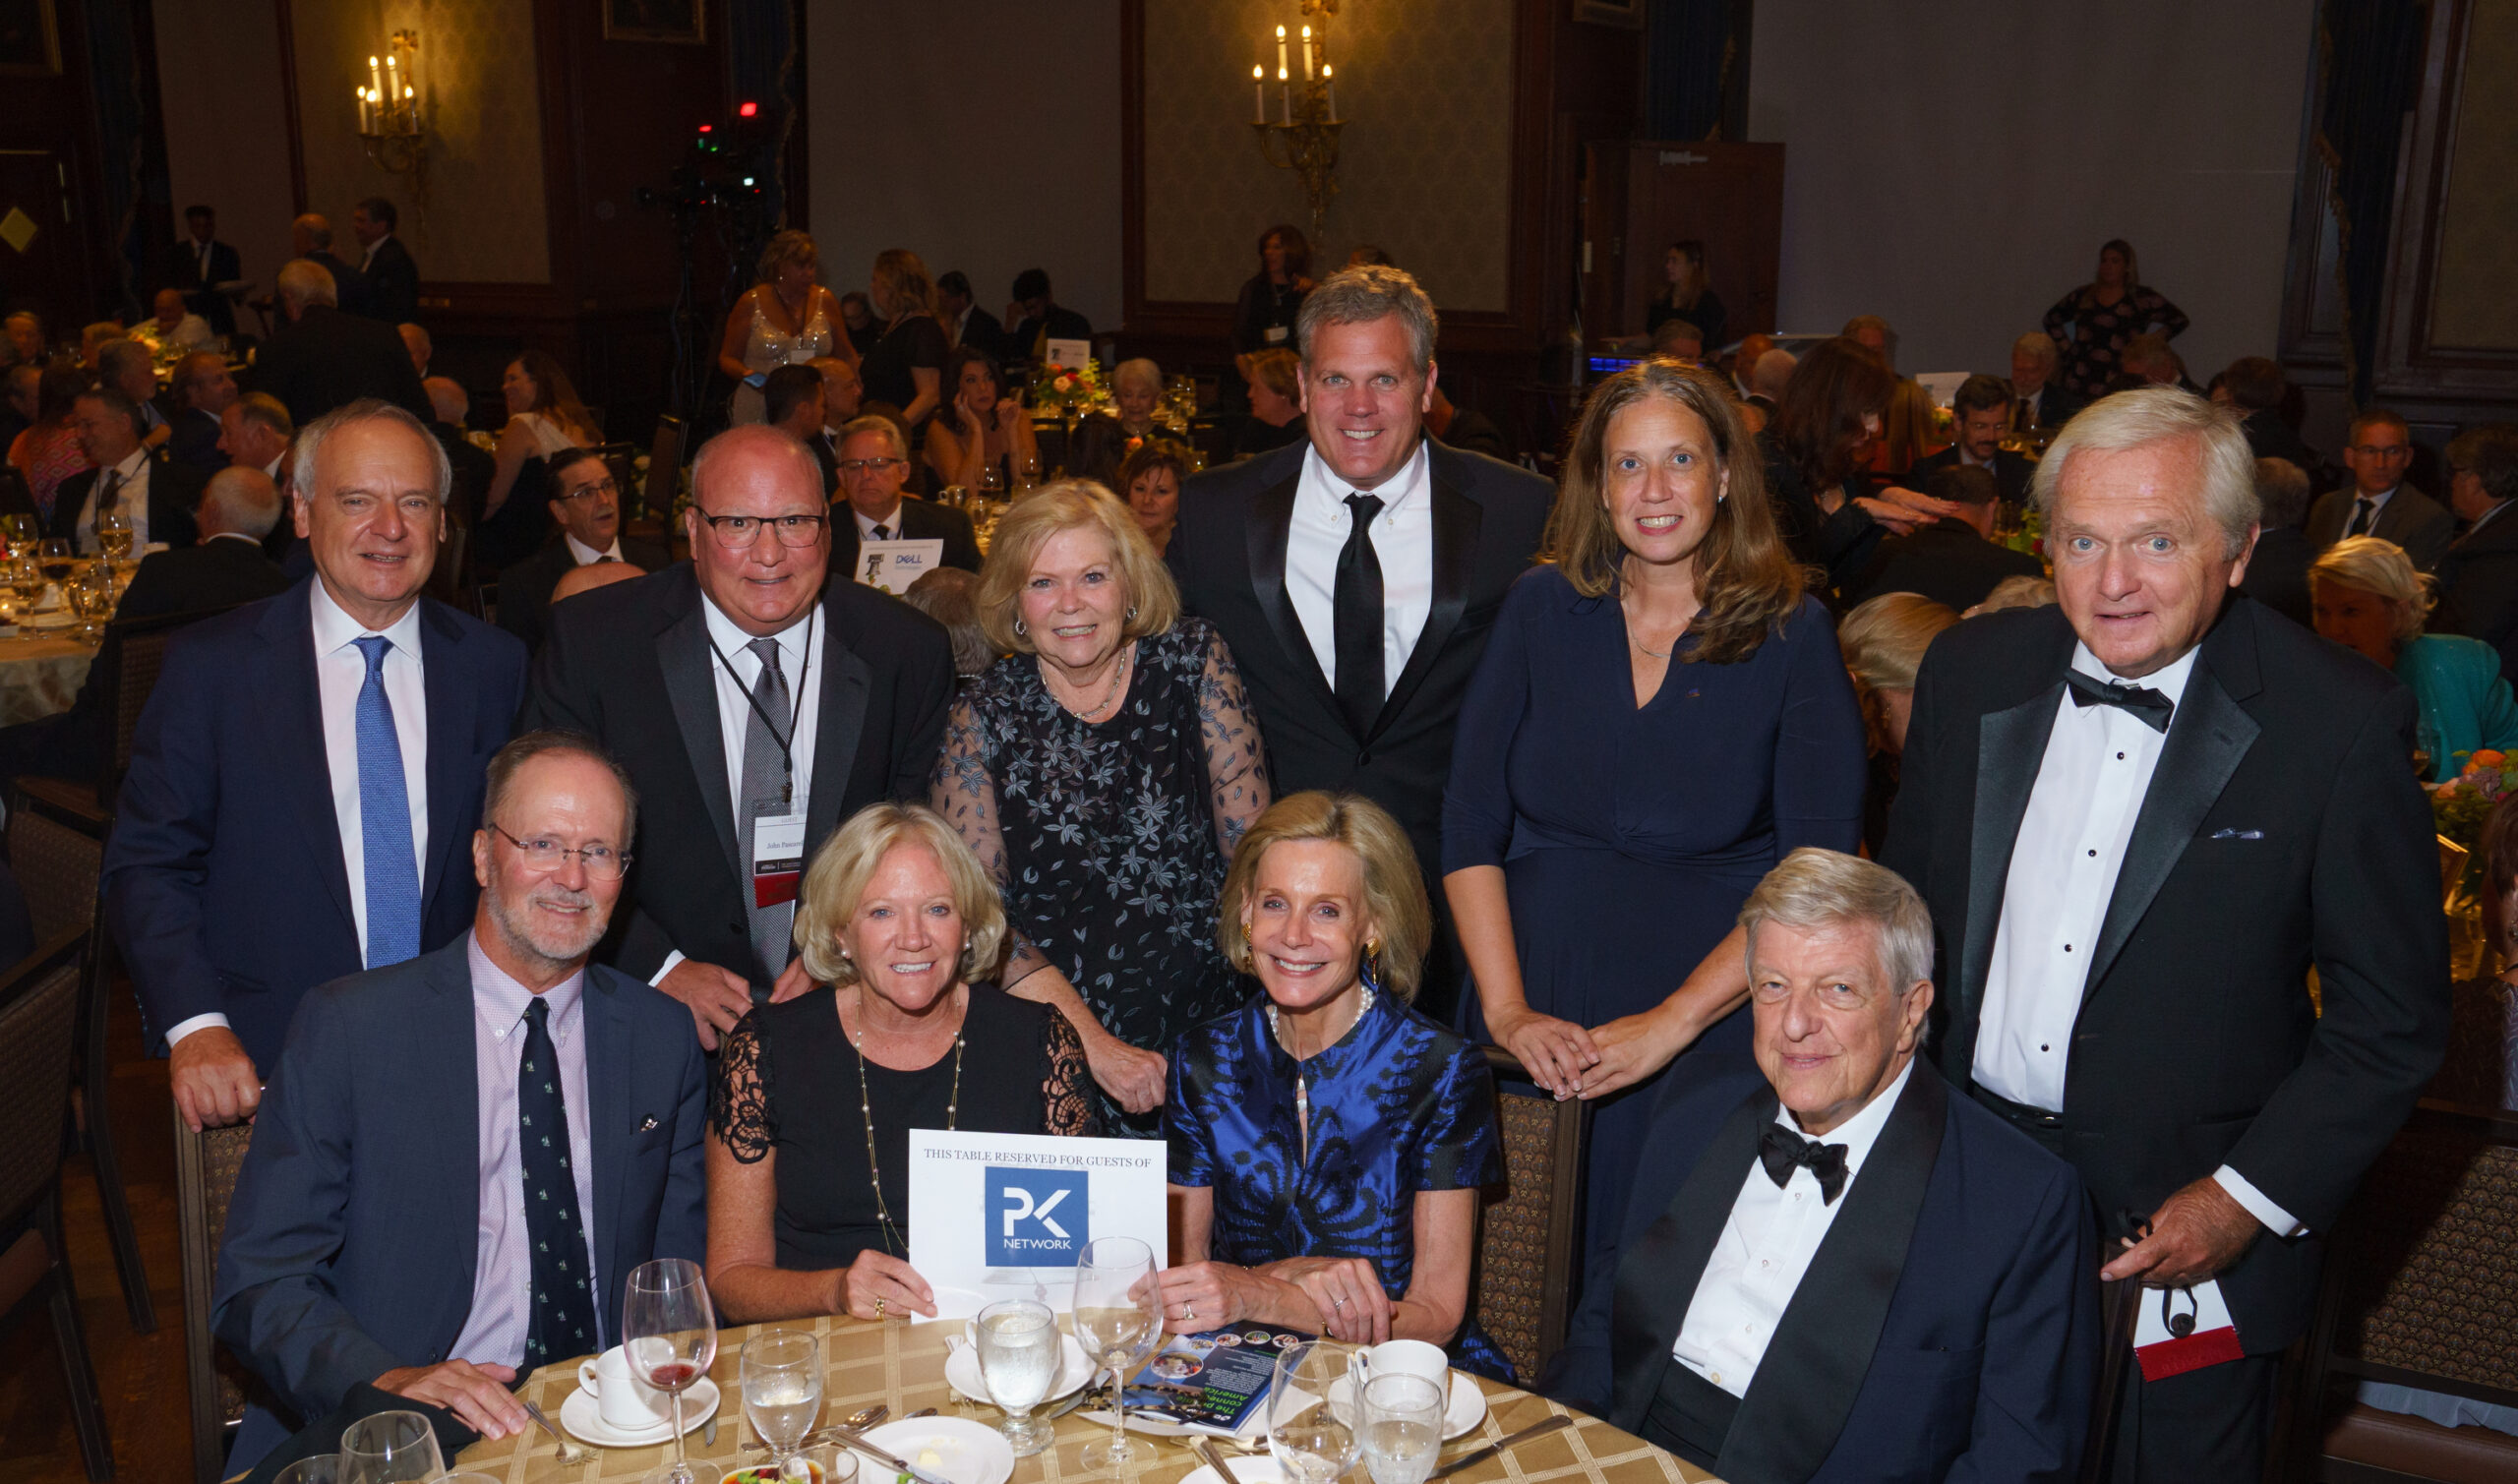 The 56th Annual Cable TV Pioneers Banquet, at The Union League of Philadelphia in Philadelphia, Pennsylvania, on Monday, Sept. 19, 2022.
Photo StevePeterson.photo